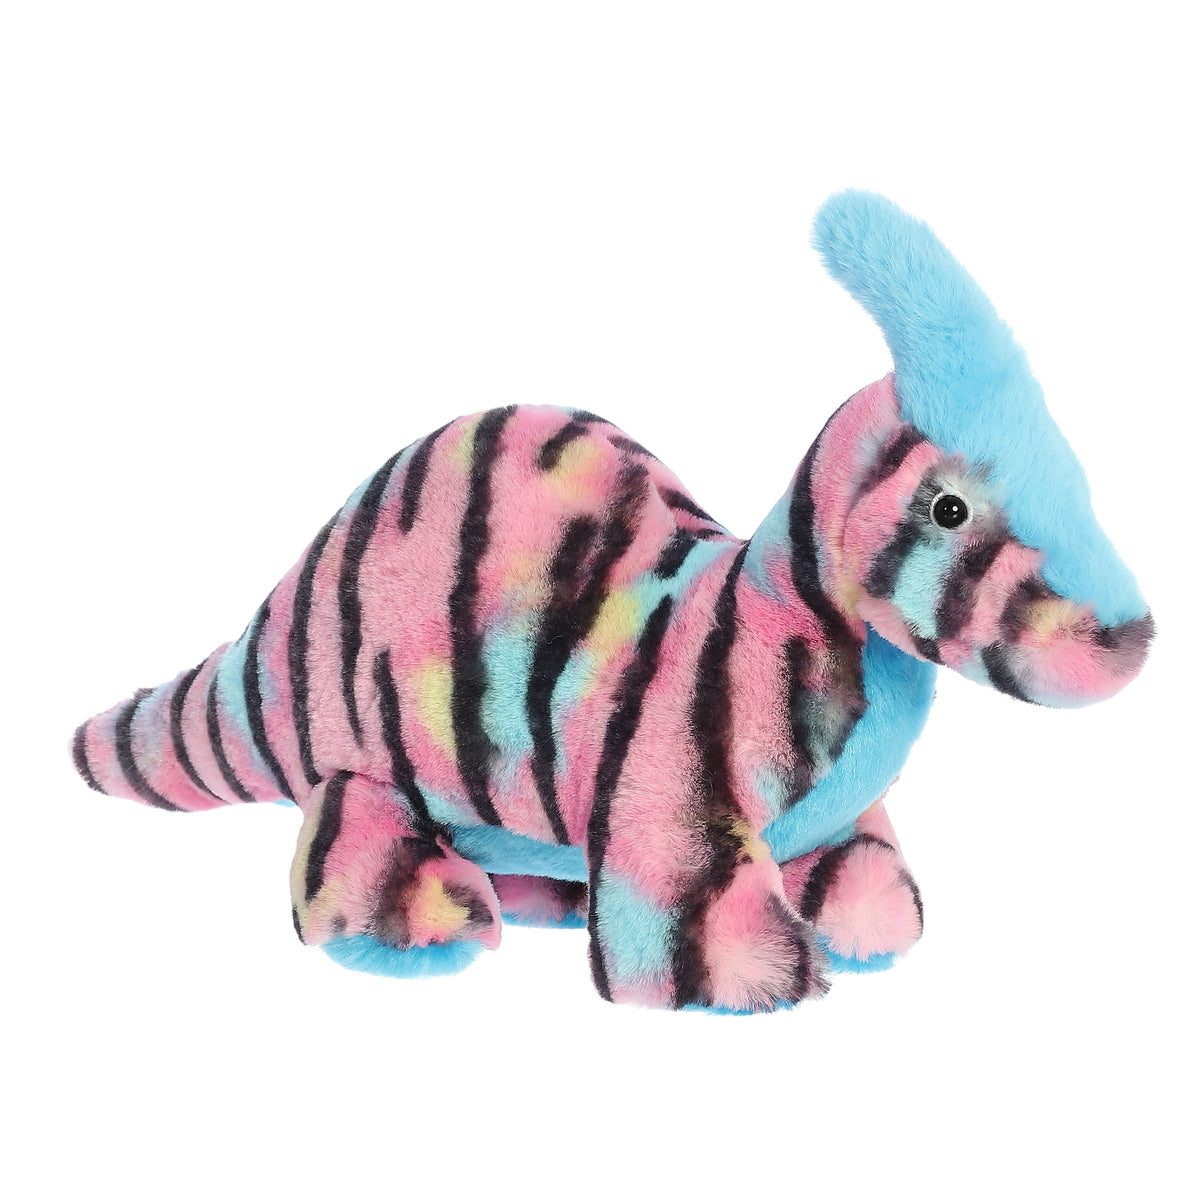 A Parasaur plush showcasing a vibrant pink body with contrasting black stripes, blue tummy, and a radiant sky-blue fur crest